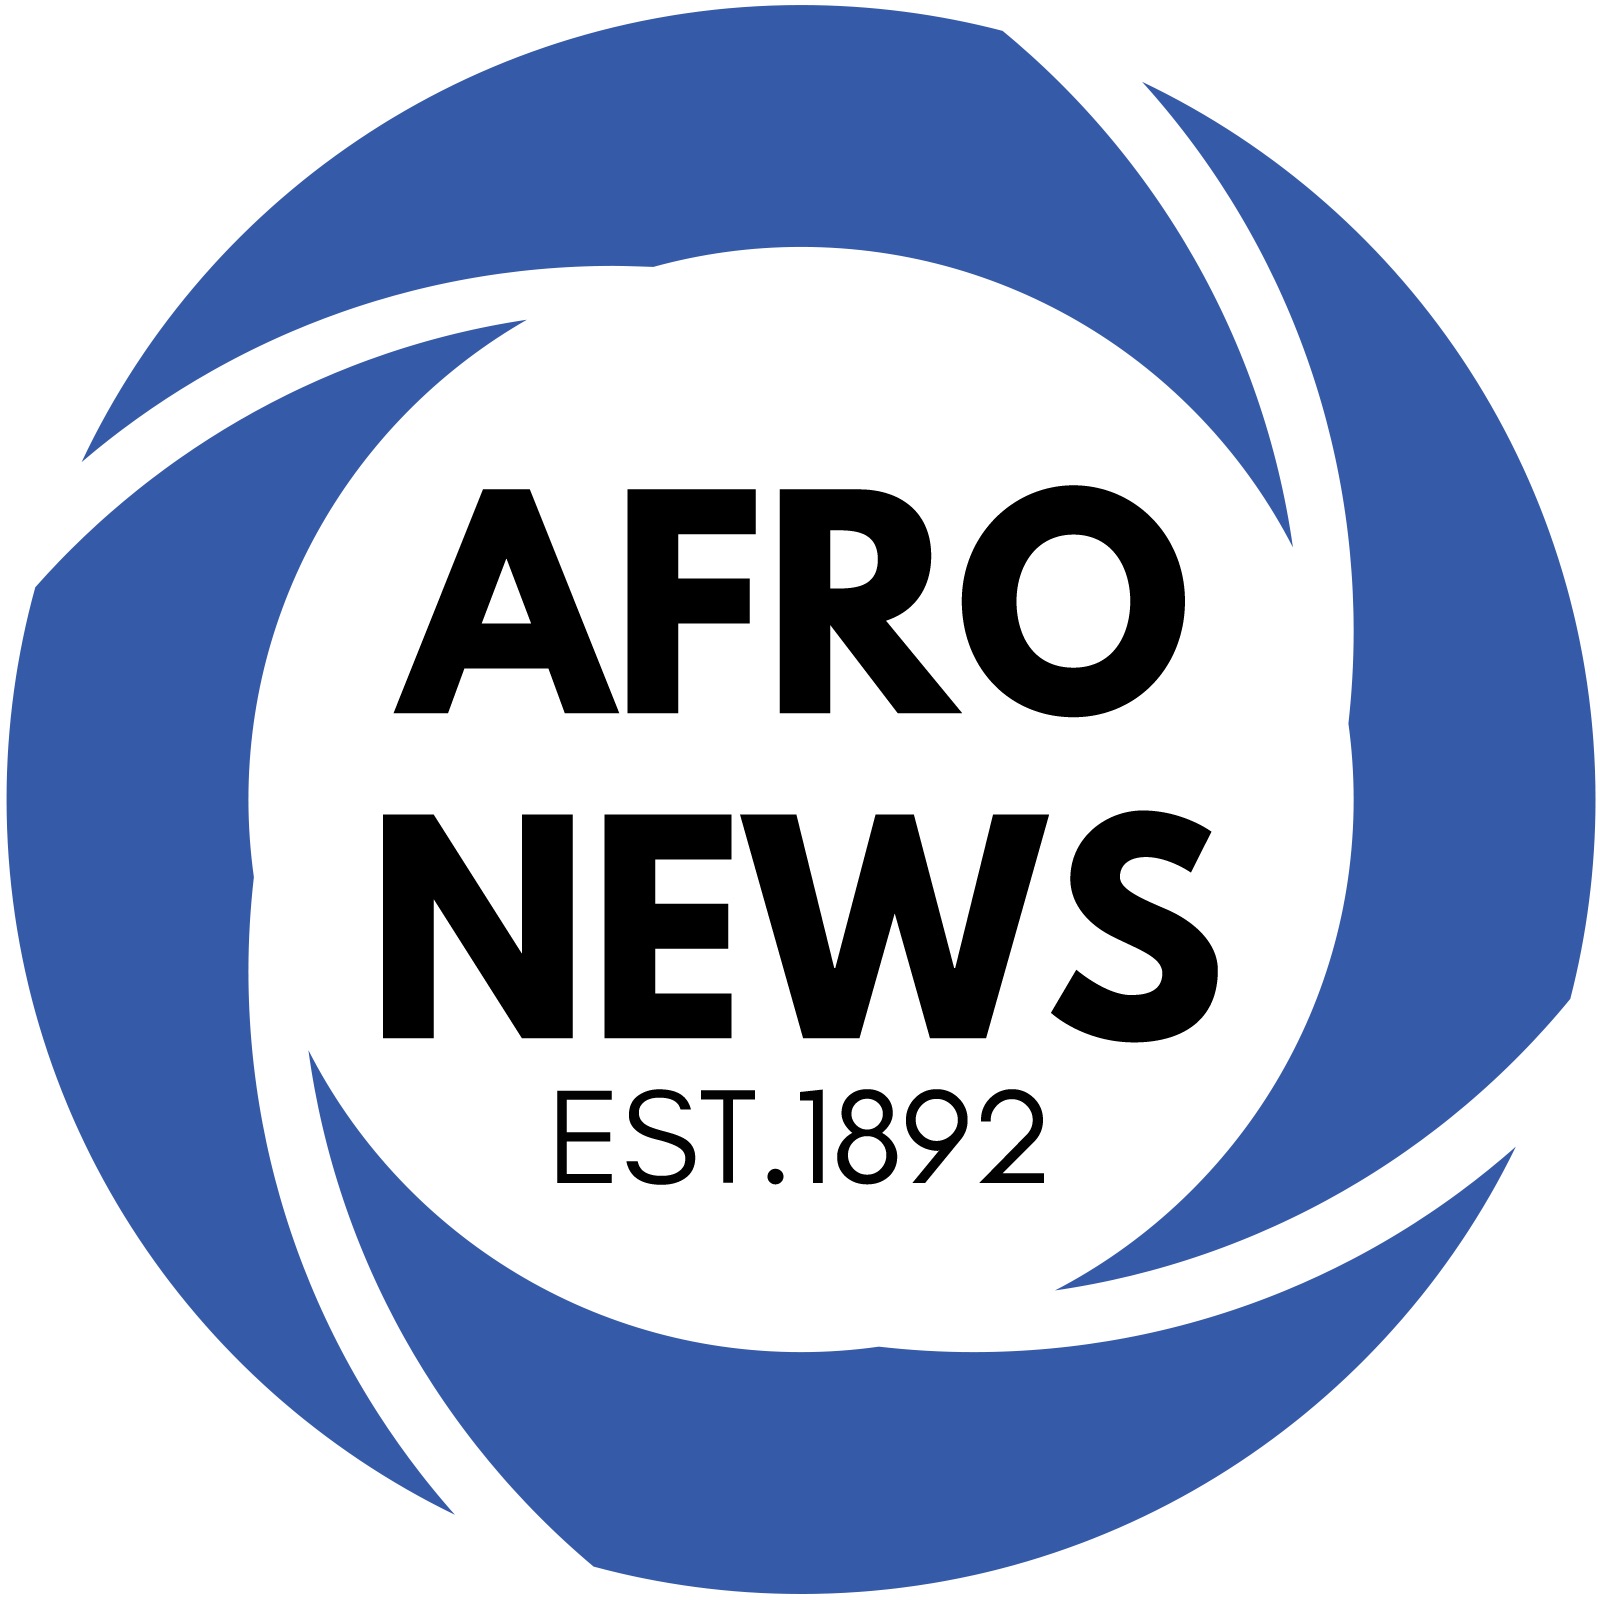 Reparations, Black unity among issues raised at debut of UN’s Permanent Forum on People of African Descent | AFRO American Newspapers Avatar